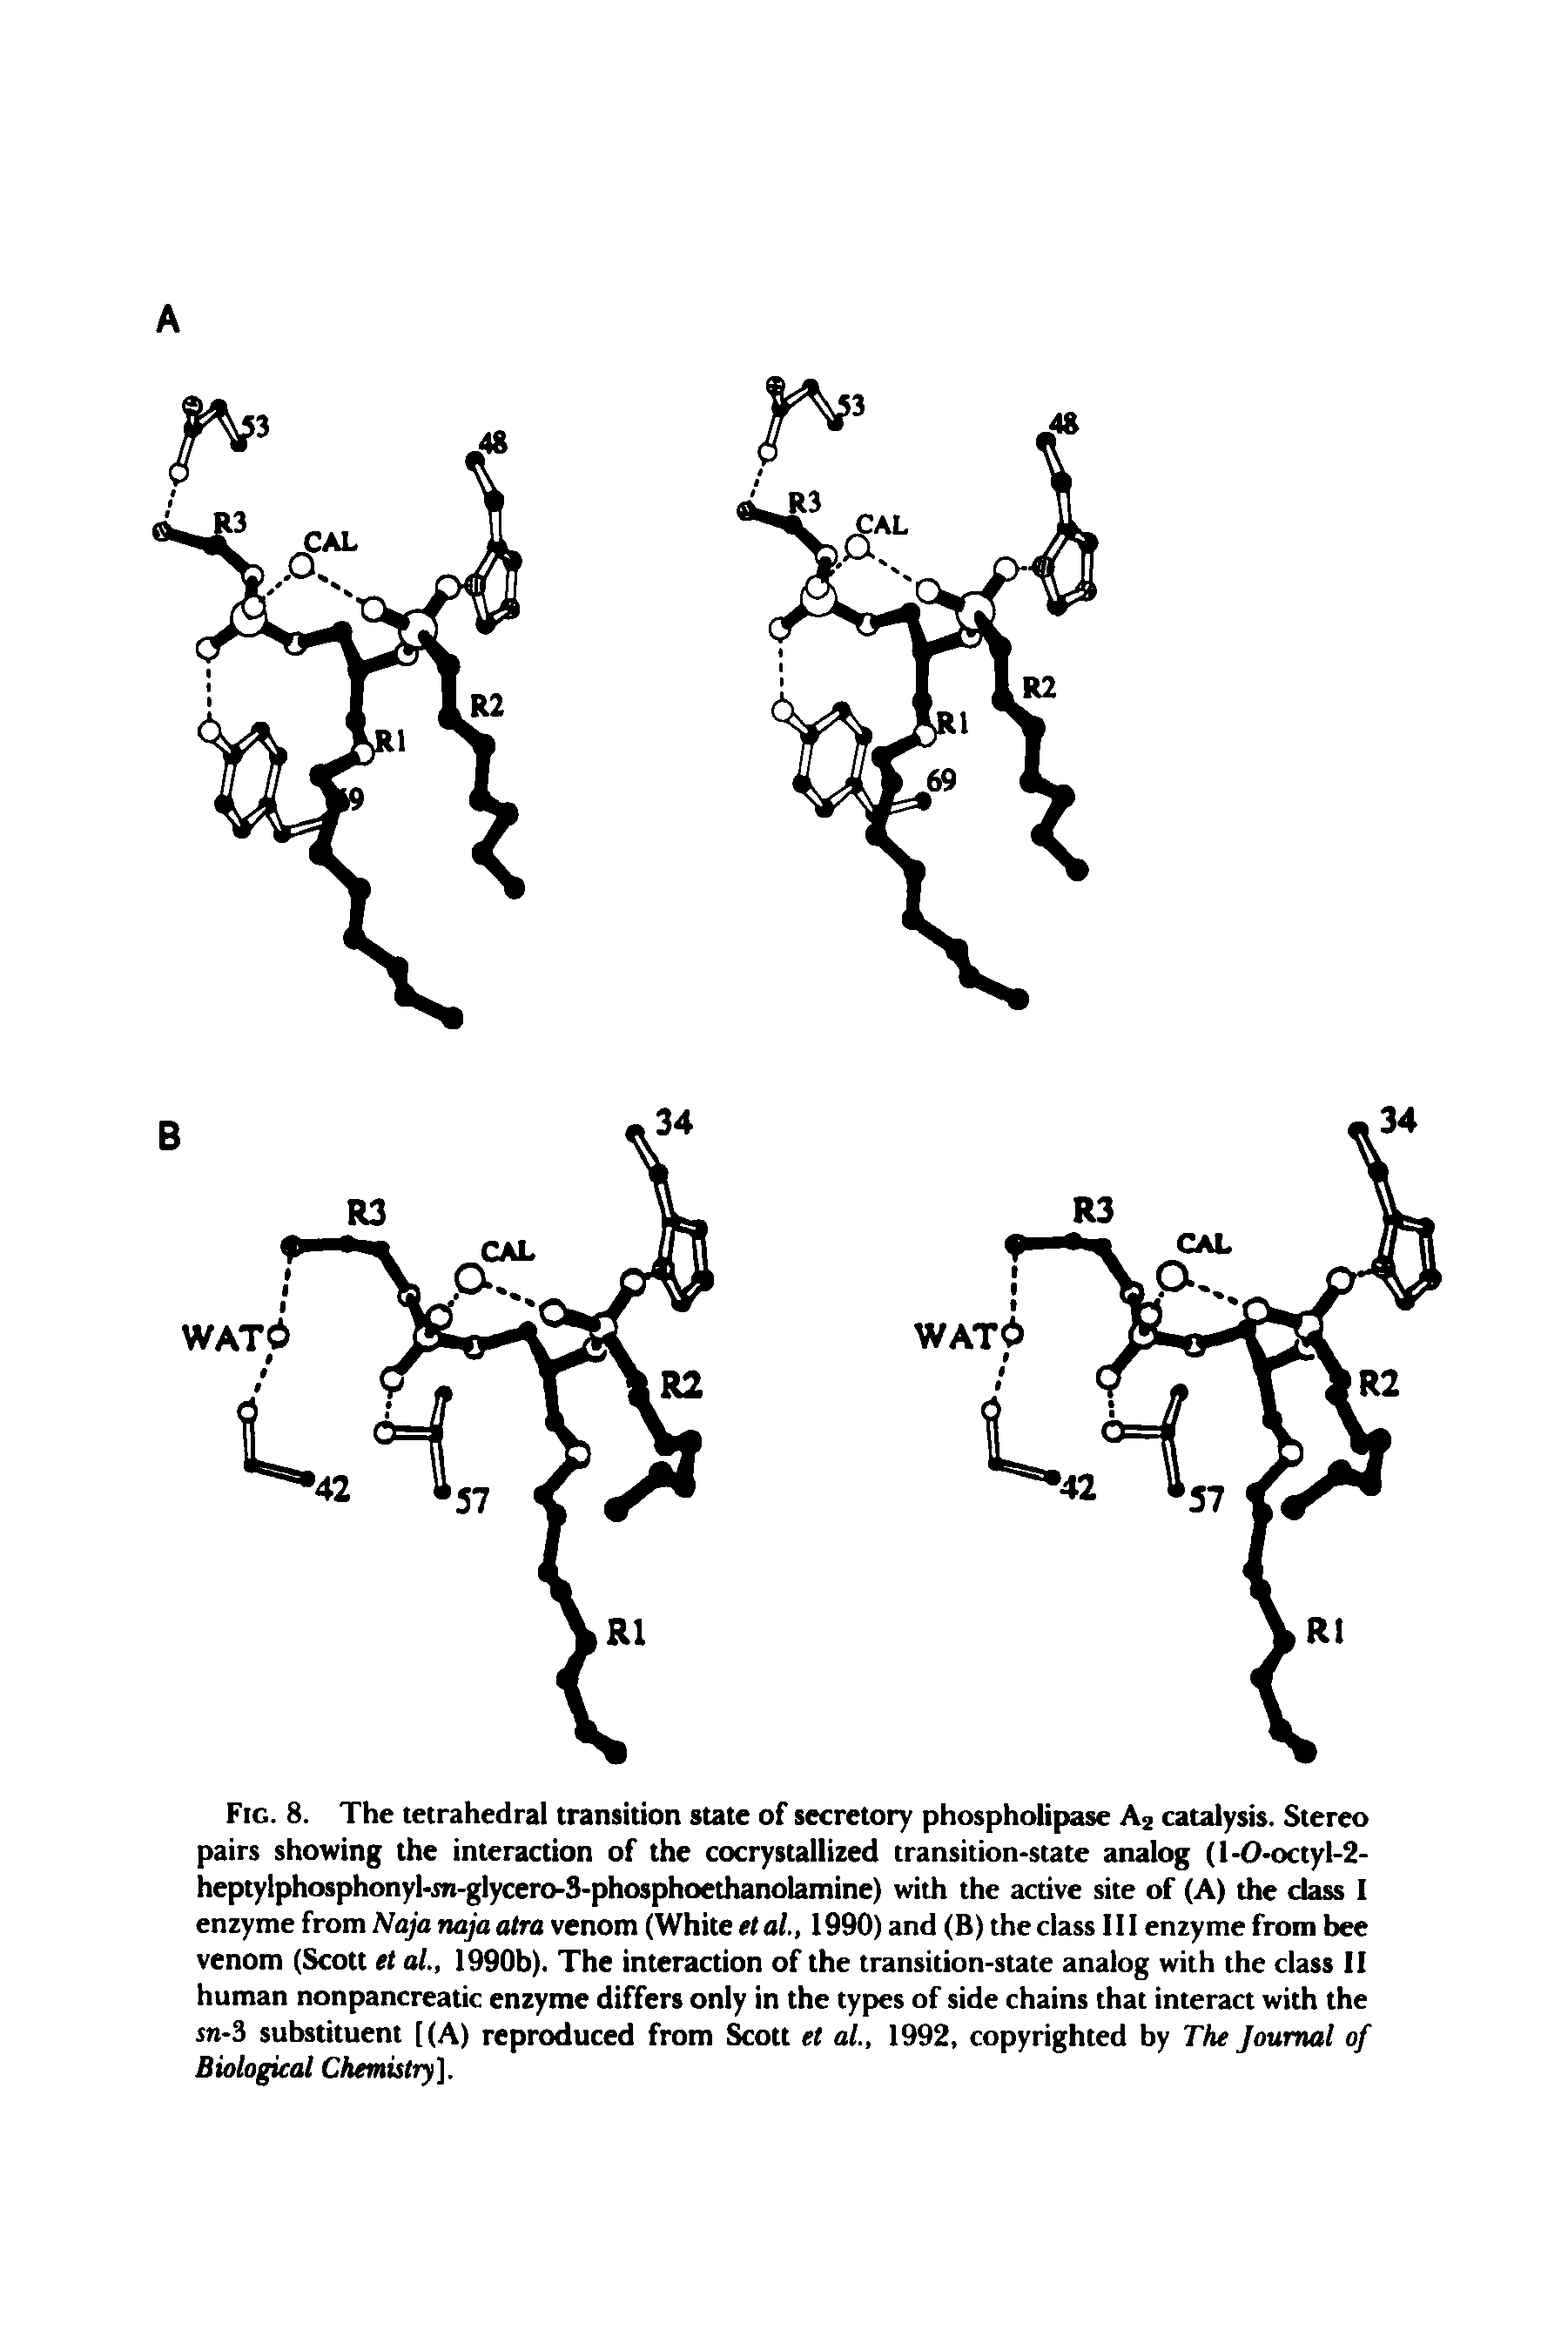 Fig. 8. The tetrahedral transition state of secretory phospholipase A2 catalysis. Stereo pairs showing the interaction of the cocrystallized transition-state analog (l-O-octyl-2-heptylphosphonyl-sn-glycero-3-phosphoethanolamine) with the active site of (A) the class I enzyme from Naja naja atra venom (White et al, 1990) and (B) the class 111 enzyme from bee venom (Scott et al., 1990b). The interaction of the transition-state analog with the class II human nonpancreatic enzyme differs only in the types of side chains that interact with the sn-3 substituent [(A) reproduced from ott et al., 1992, copyrighted by The Journal of Biological Chemistry].